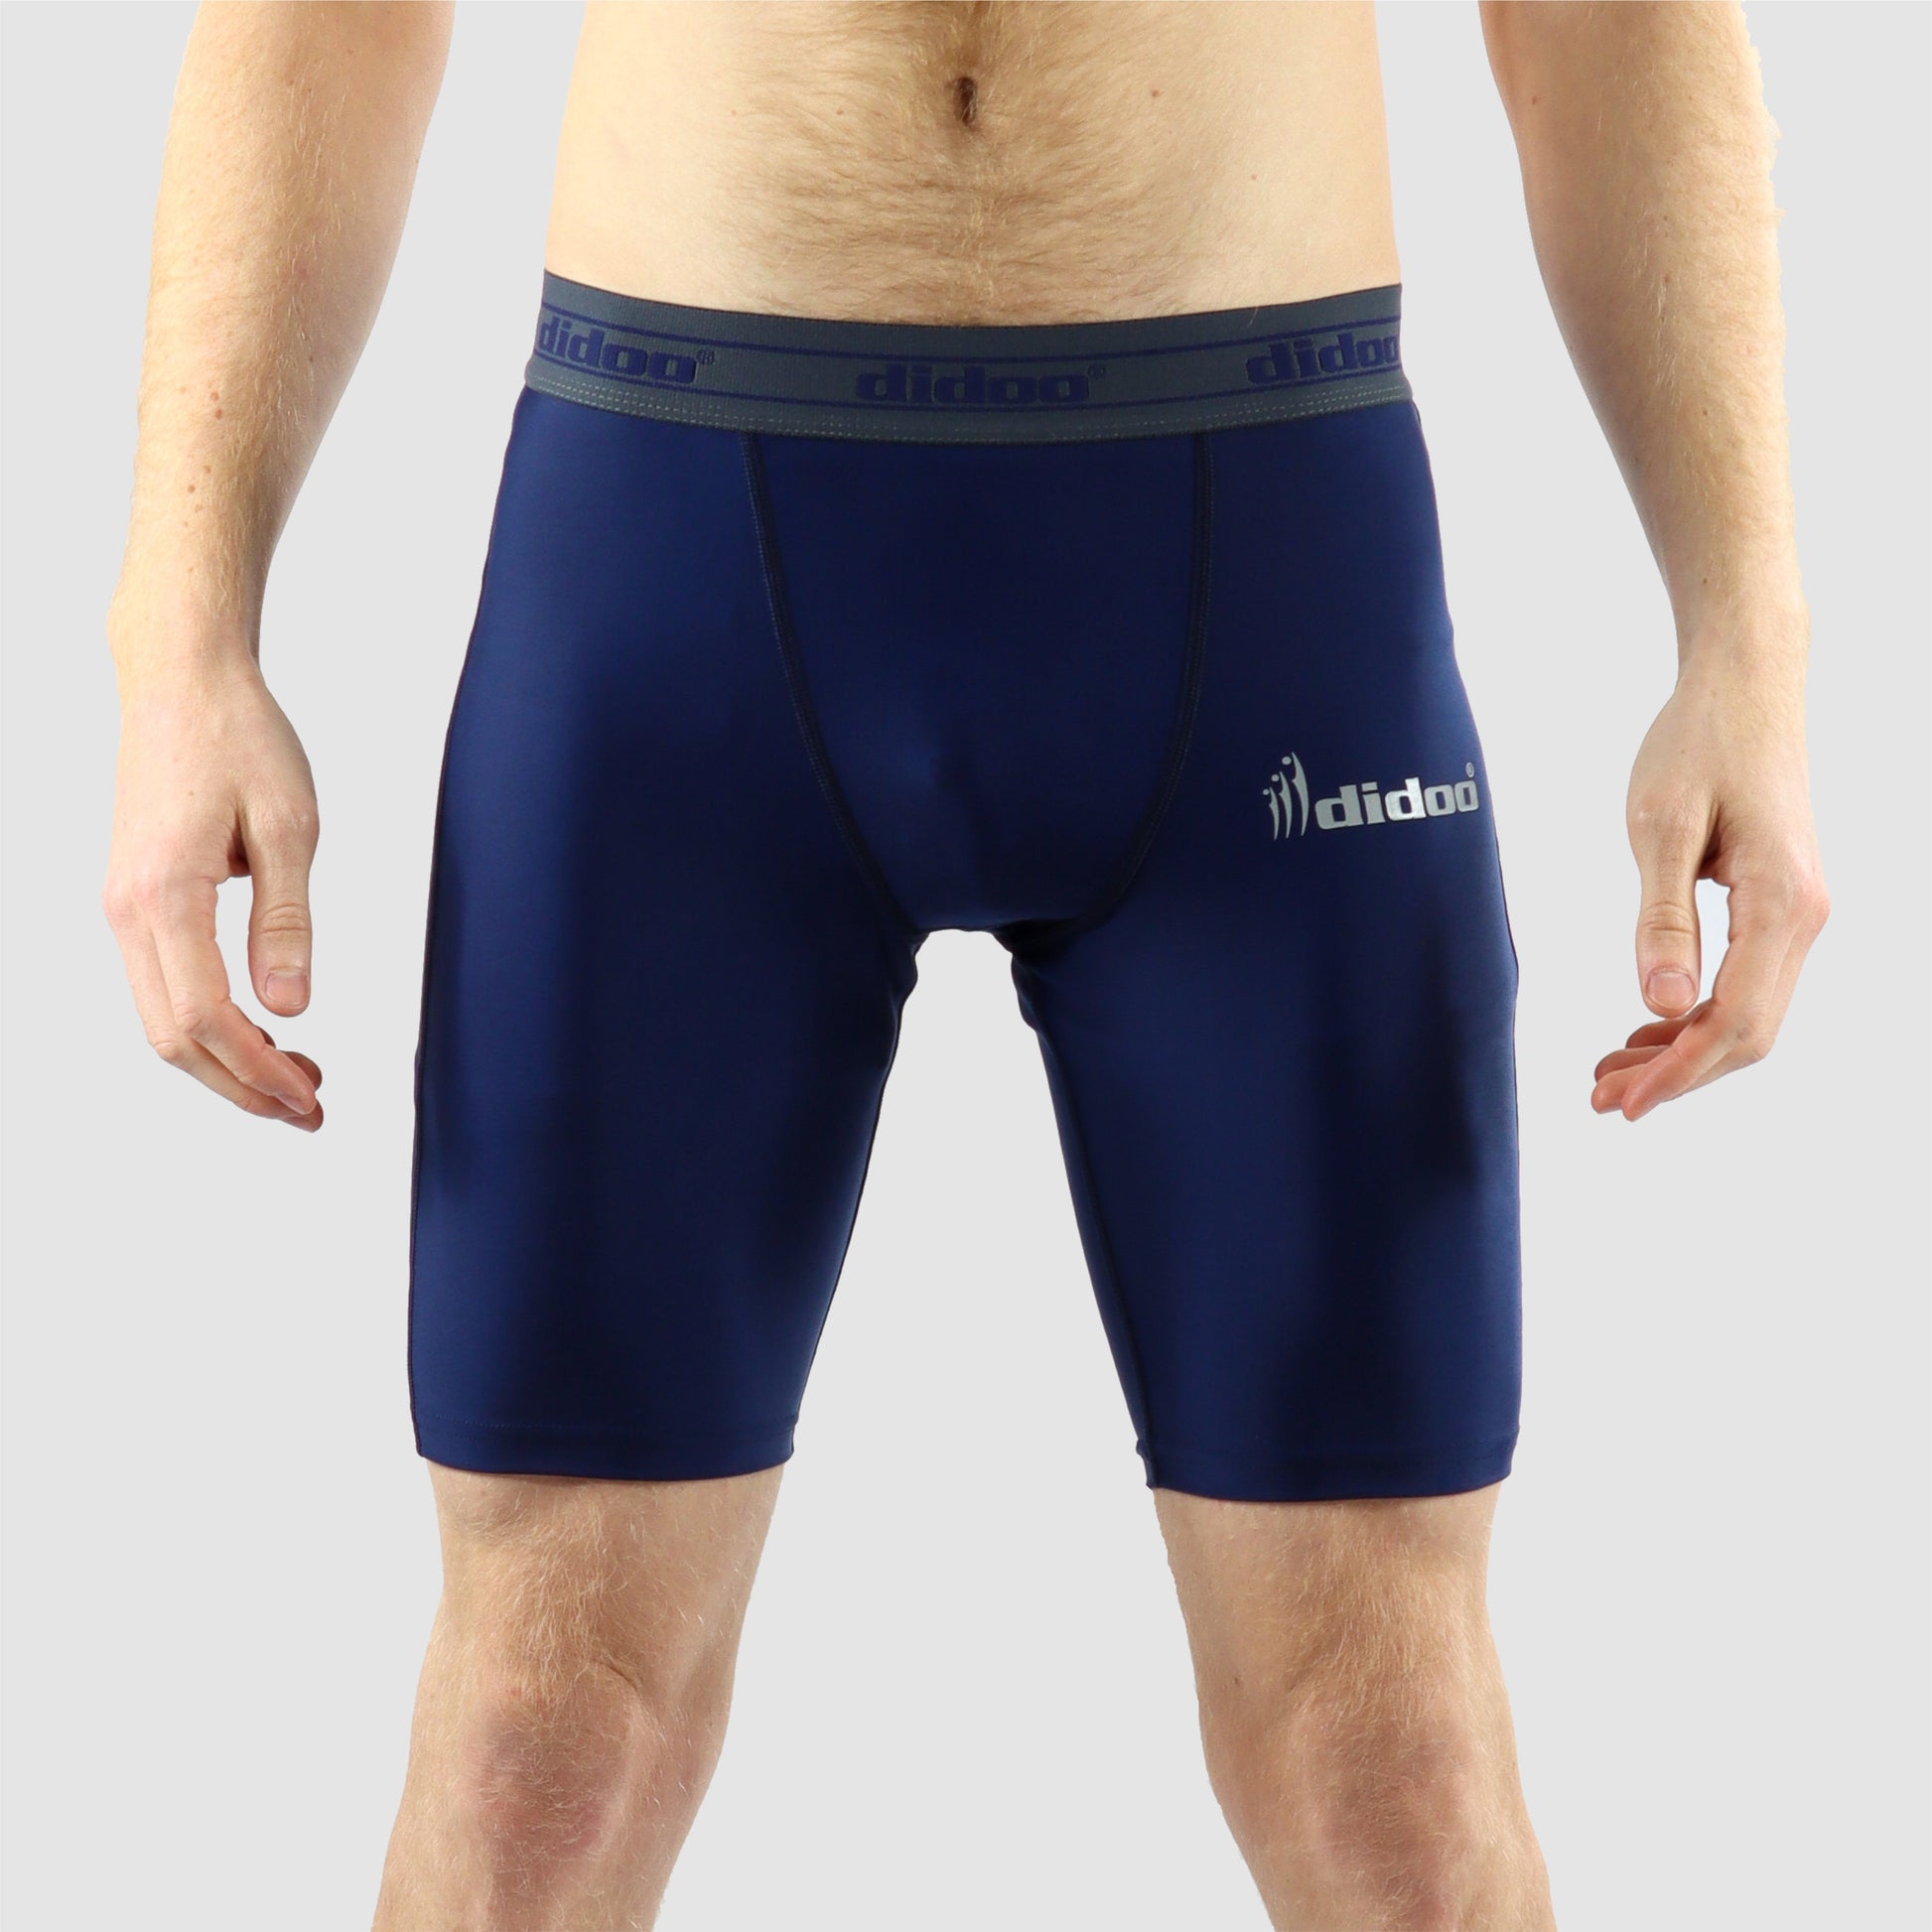 Navy Blue DiDOO Men's Compression Base Layer Shorts